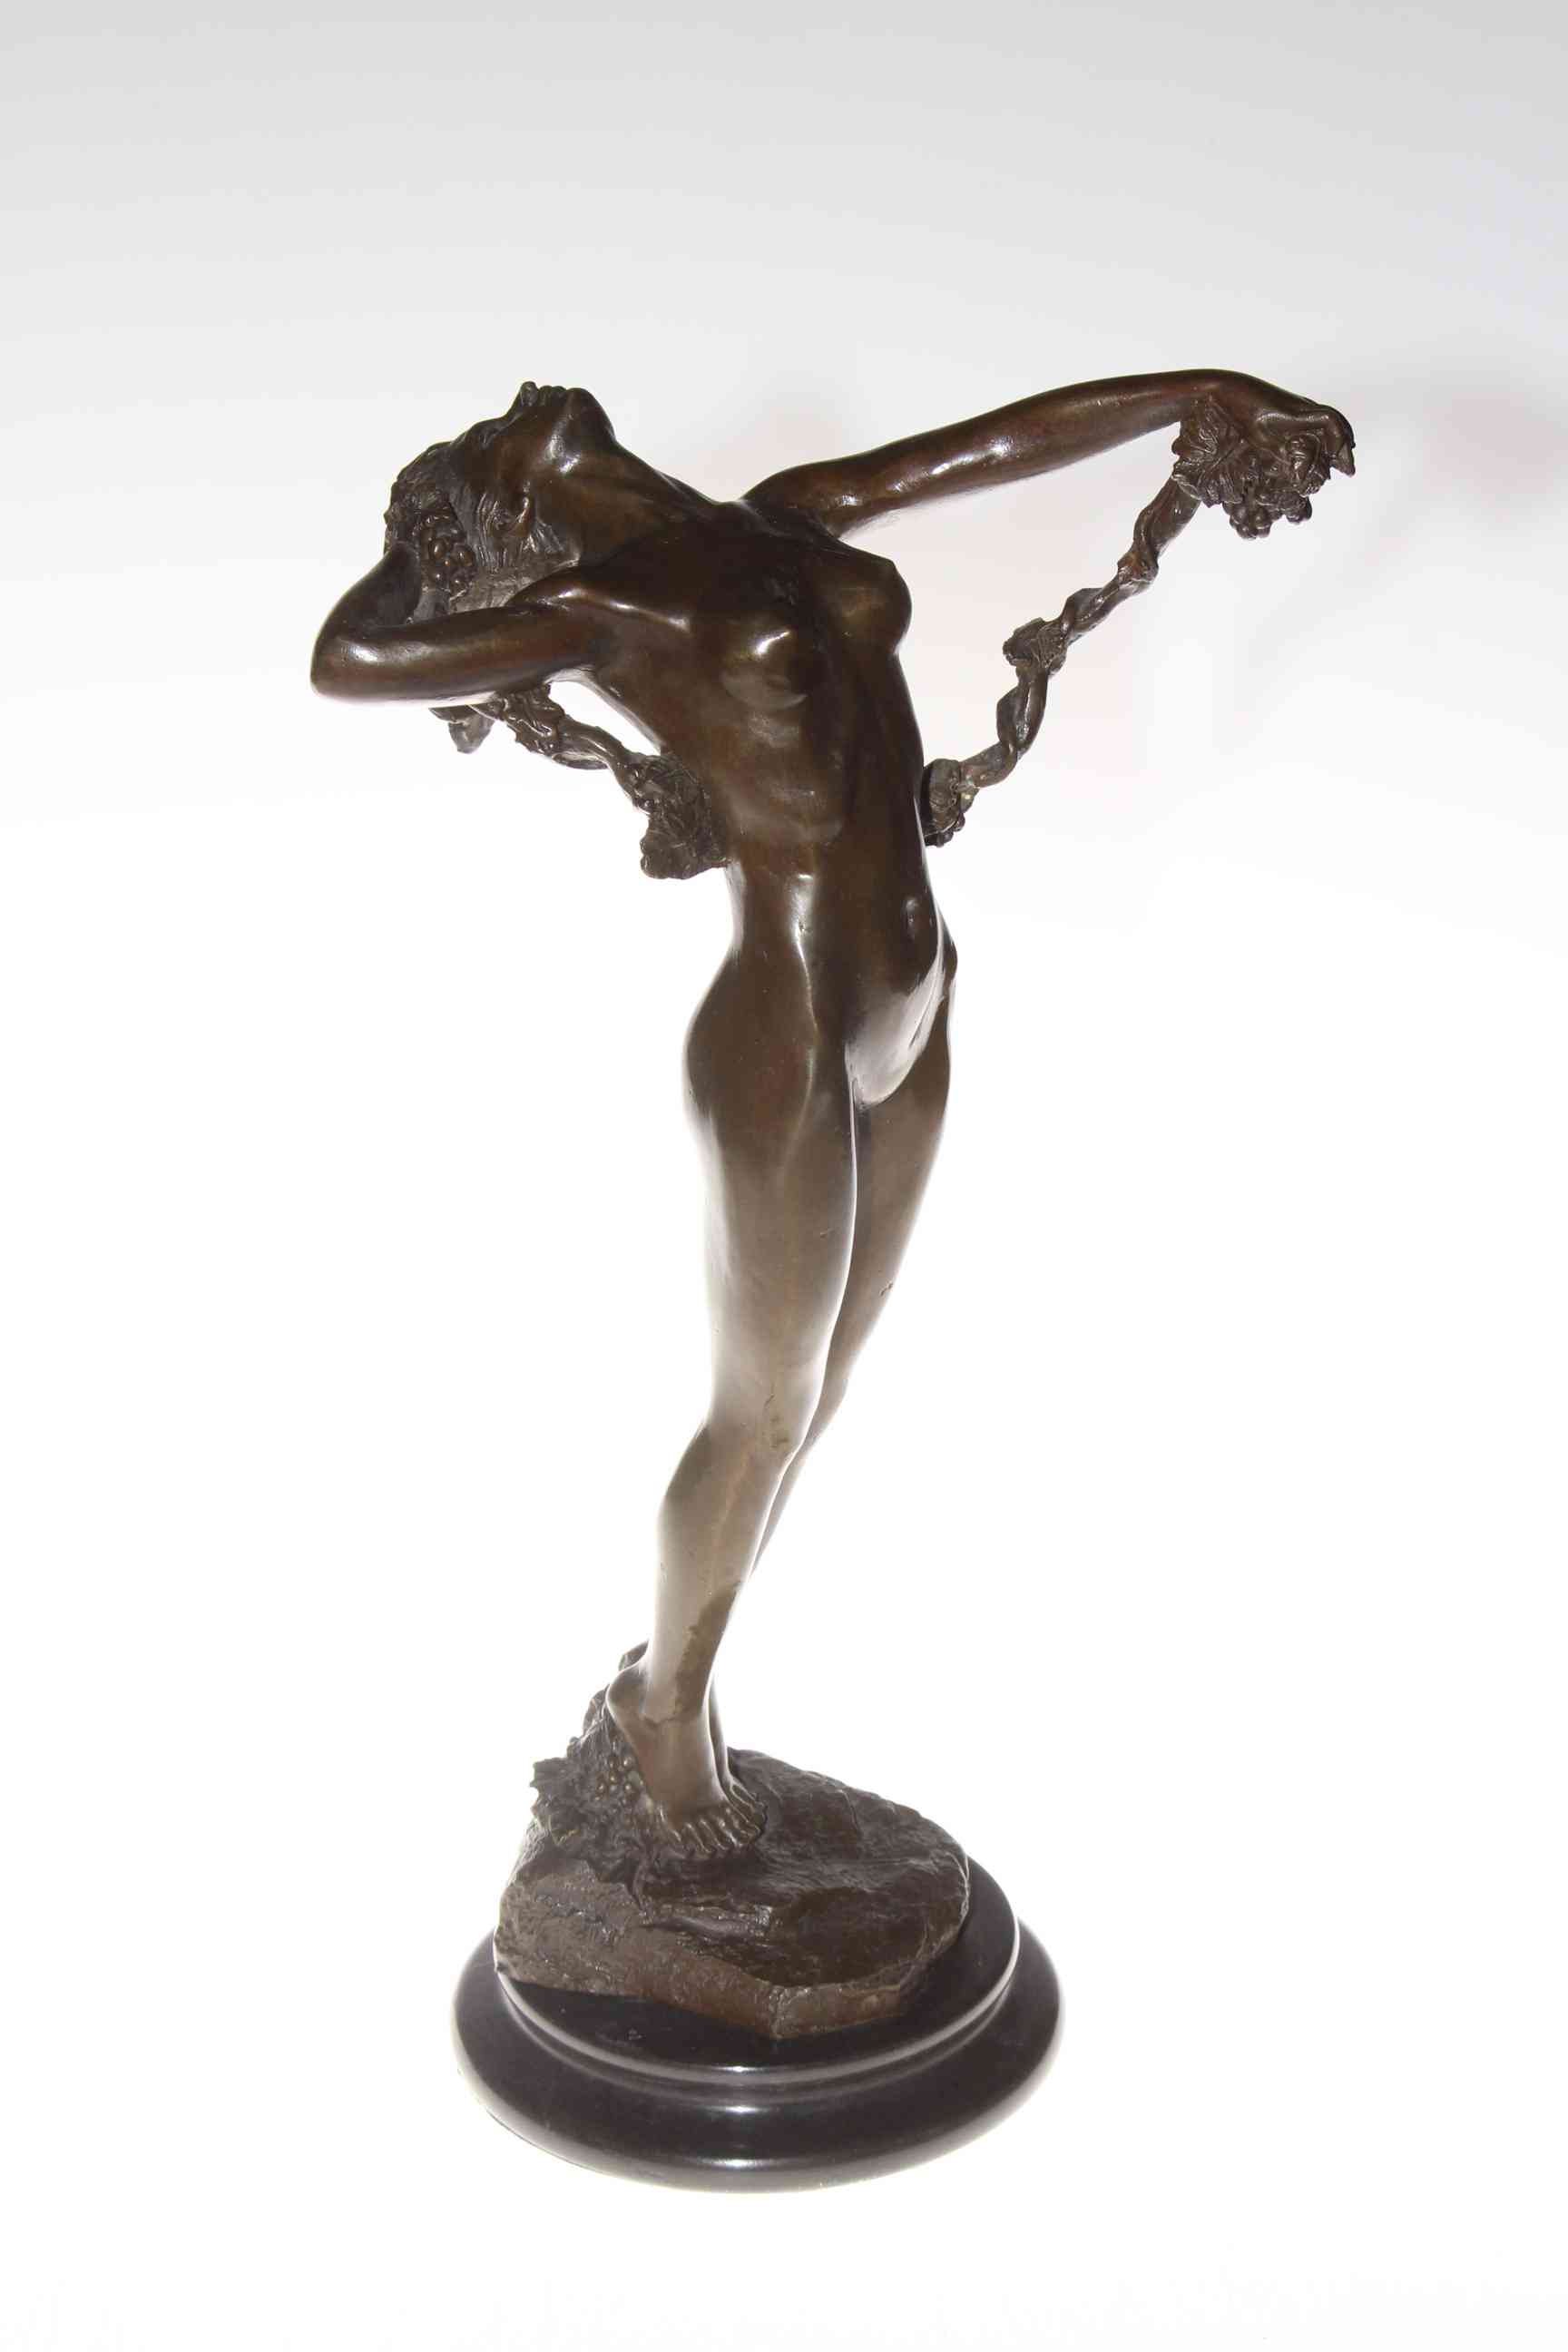 Bronze semi-clad lady in a dancing pose on plinth stand, 37cm. - Image 2 of 2